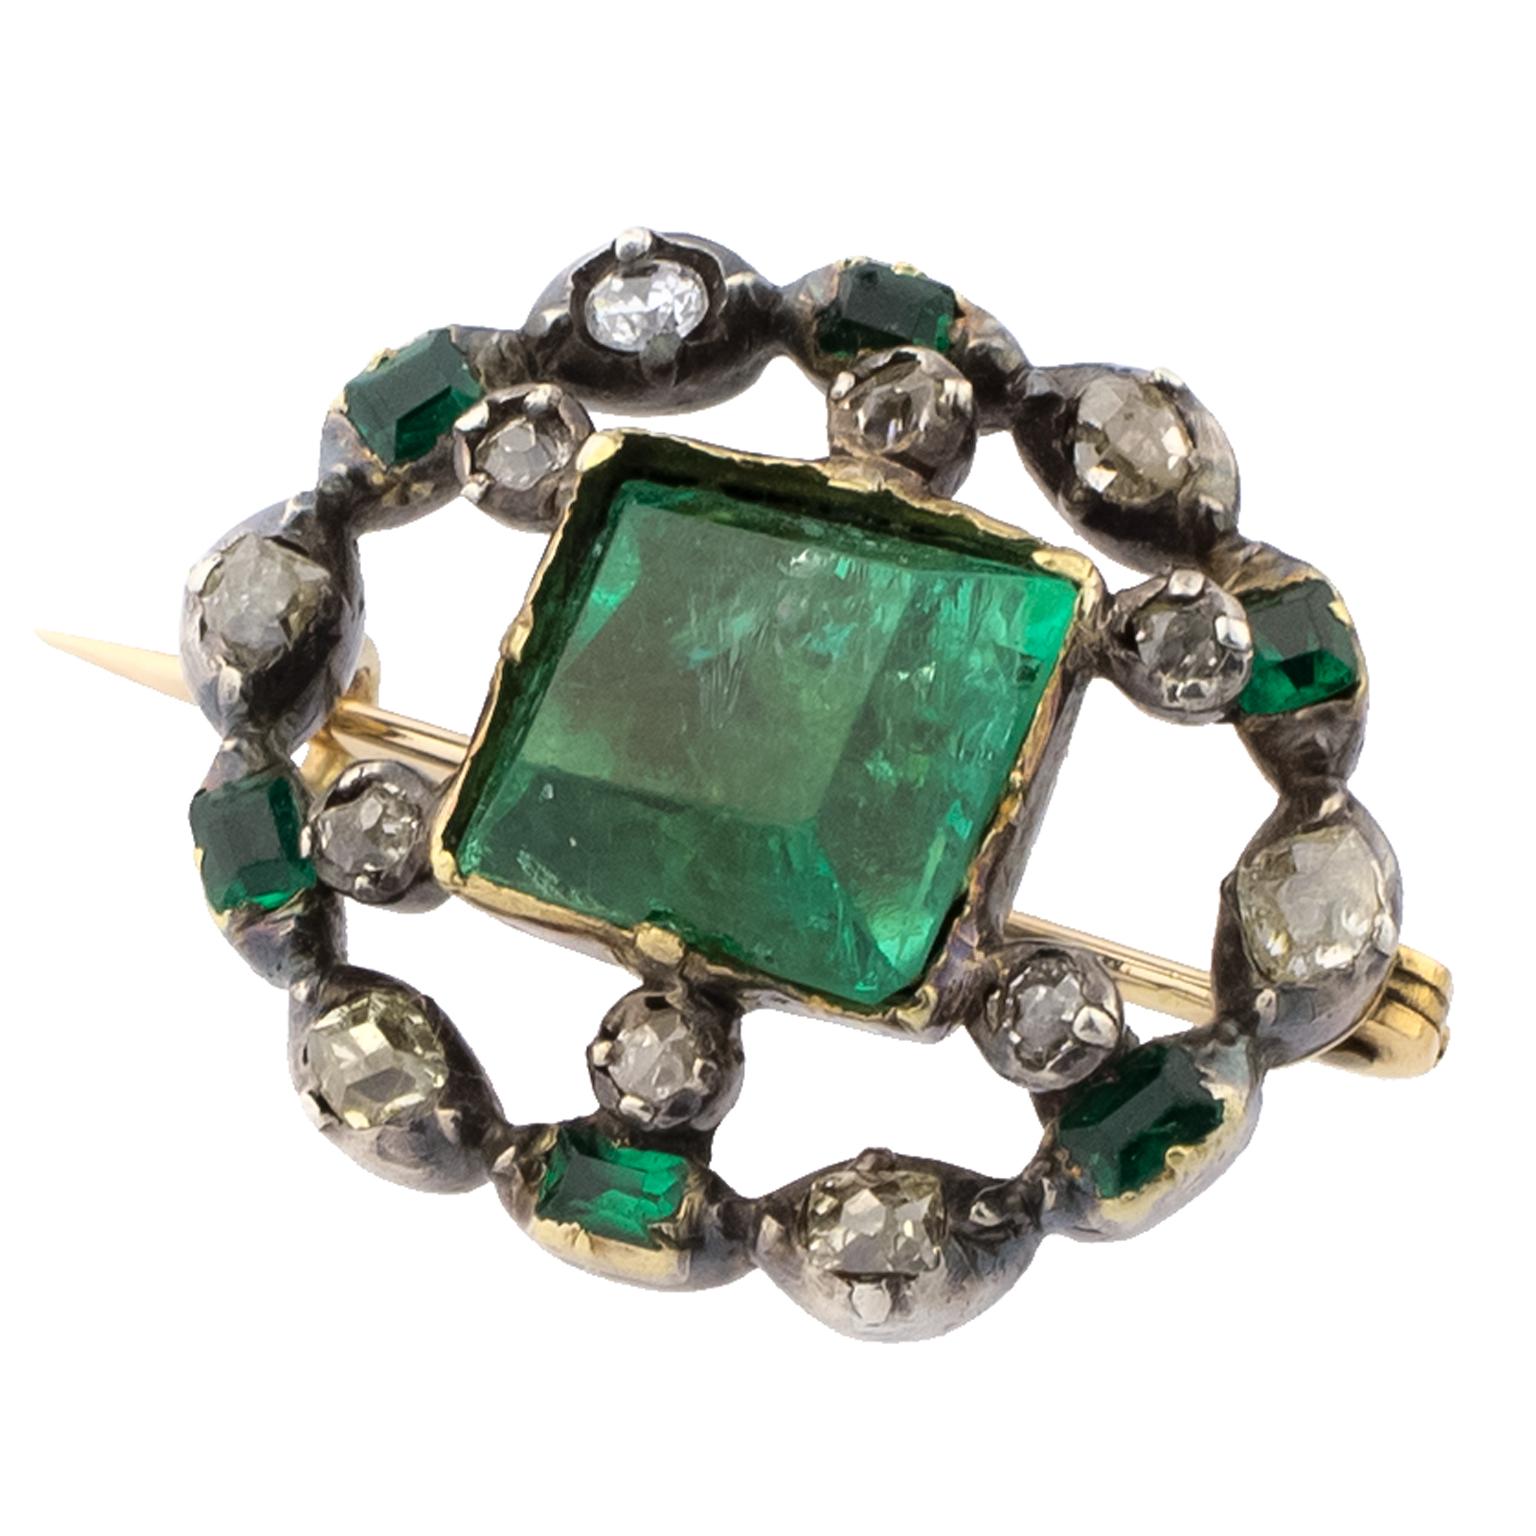 Early 19th century brooch in silver-topped gold centered by a table cut emerald, surrounded by smaller diamonds and emeralds.
Dimensions: 23 x 18 mm (0.91 x 0.71 in)